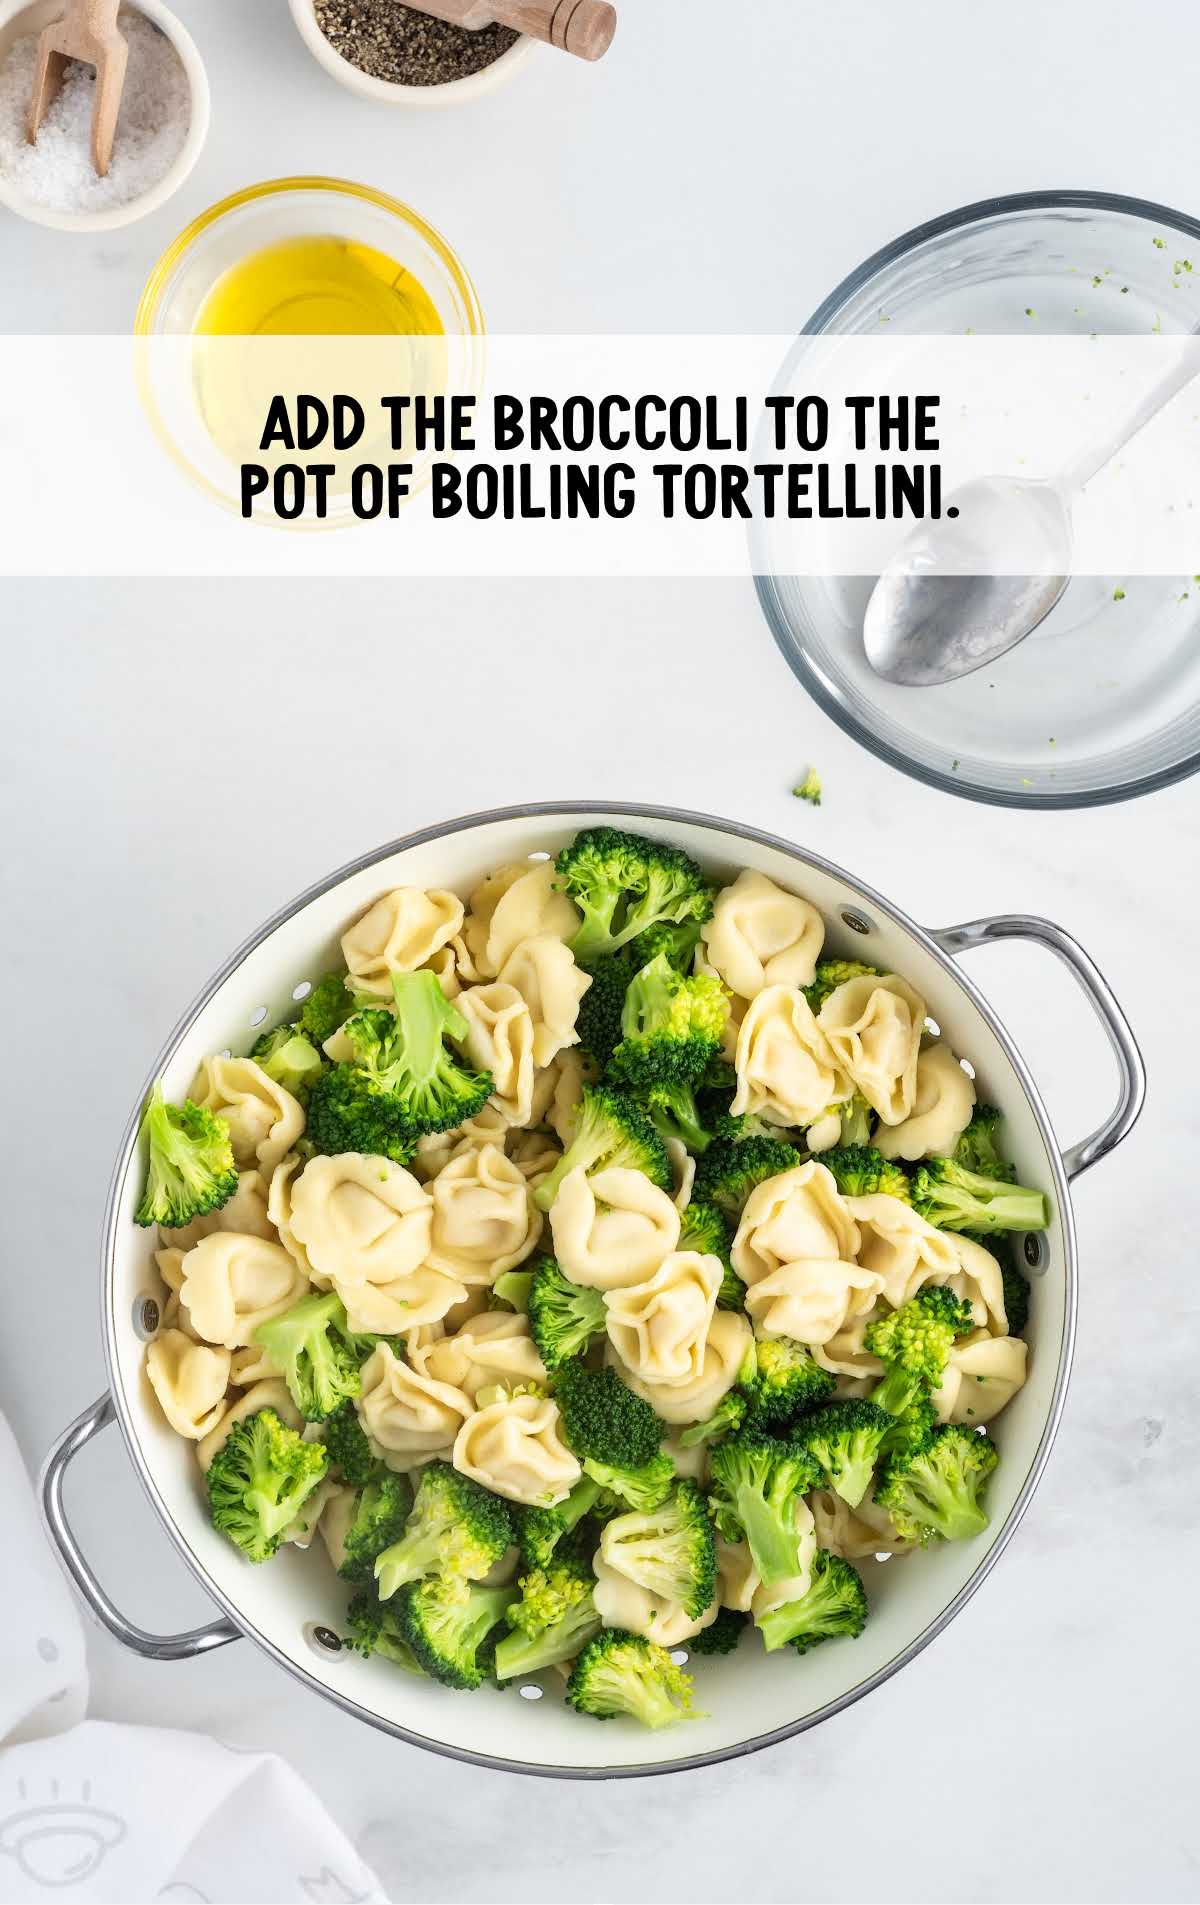 broccoli added to the pot of boiling tortellini